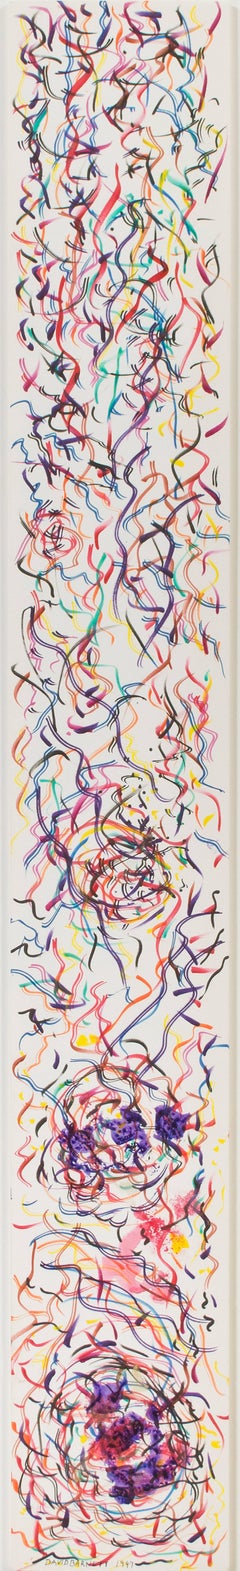 "Morph Dog Frenzy, " Ink, Watercolor, and Acrylic signed by David Barnett